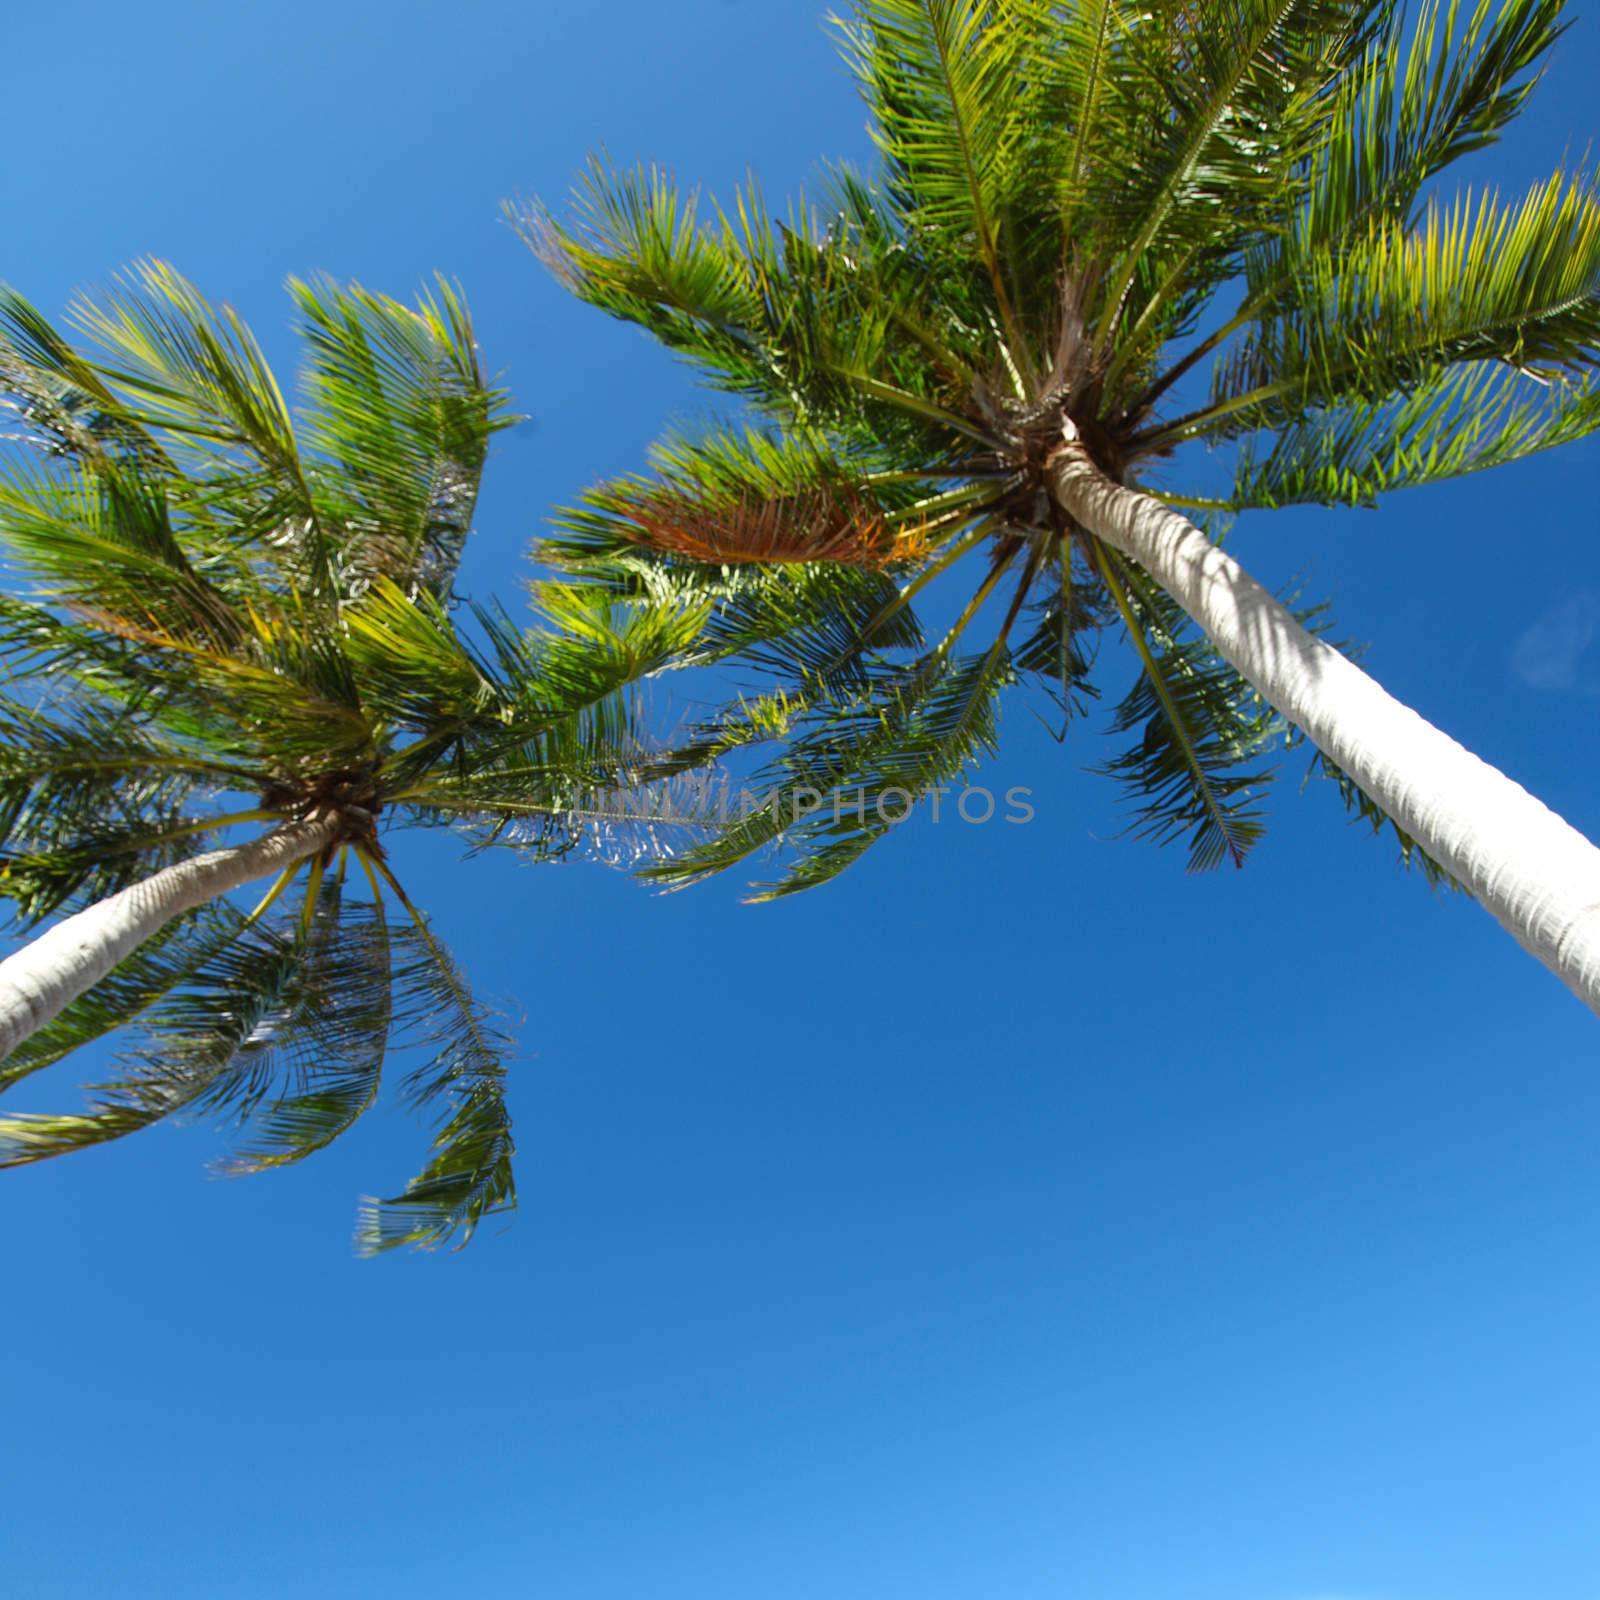 Palm trees low angle view on blue sky background